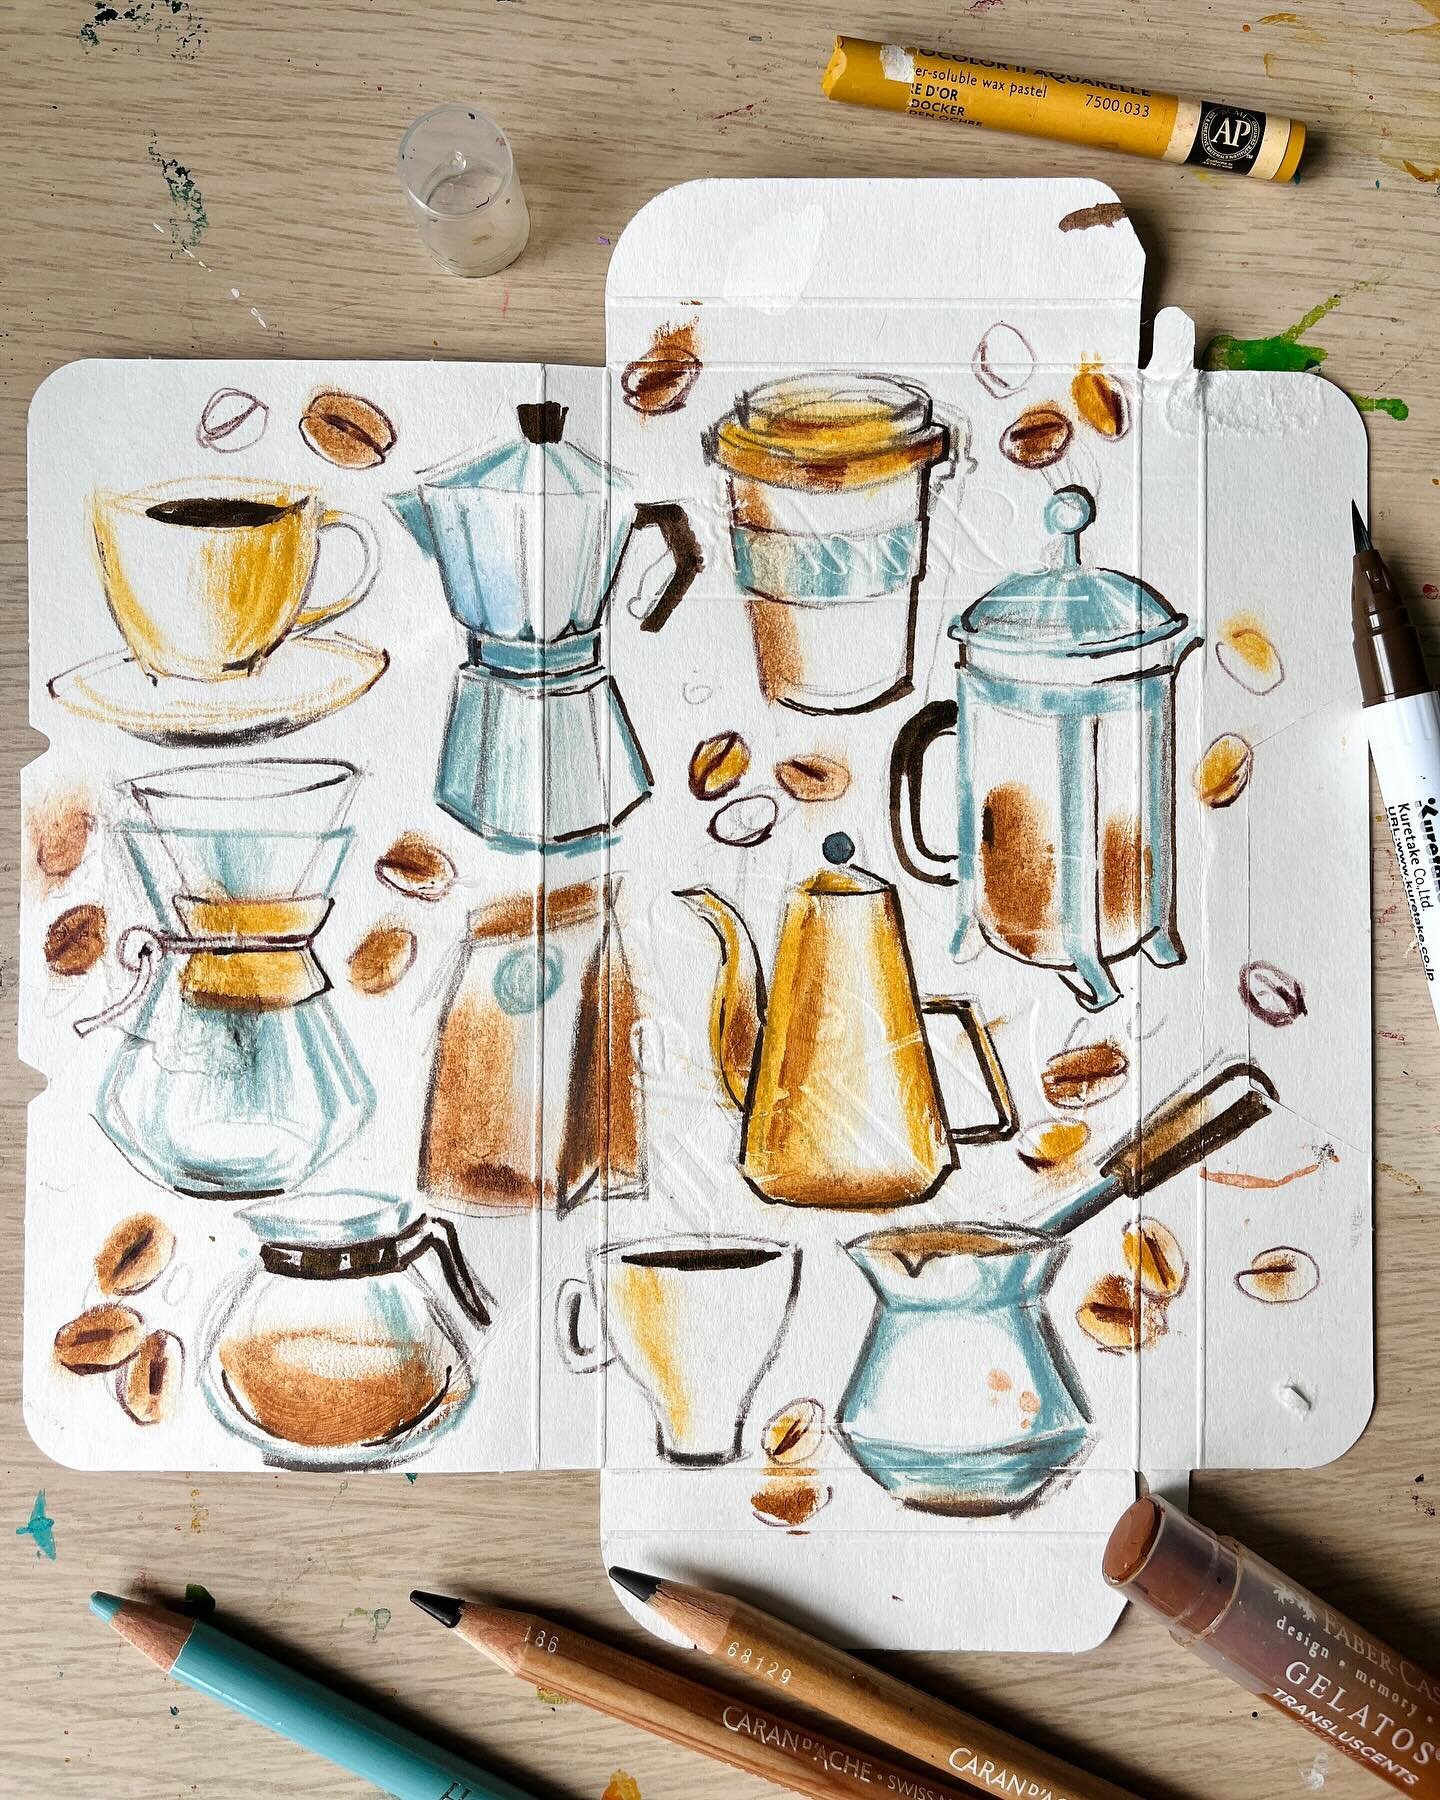 ☕️On my Patreon today I shared the full process video (48mins long !!) for creating these coffee pots using mixed media on the back of @lindt @lindtuk chocolate bar pack 🍫 I share my tip tips for working on back of cardboard packs such as limiting c